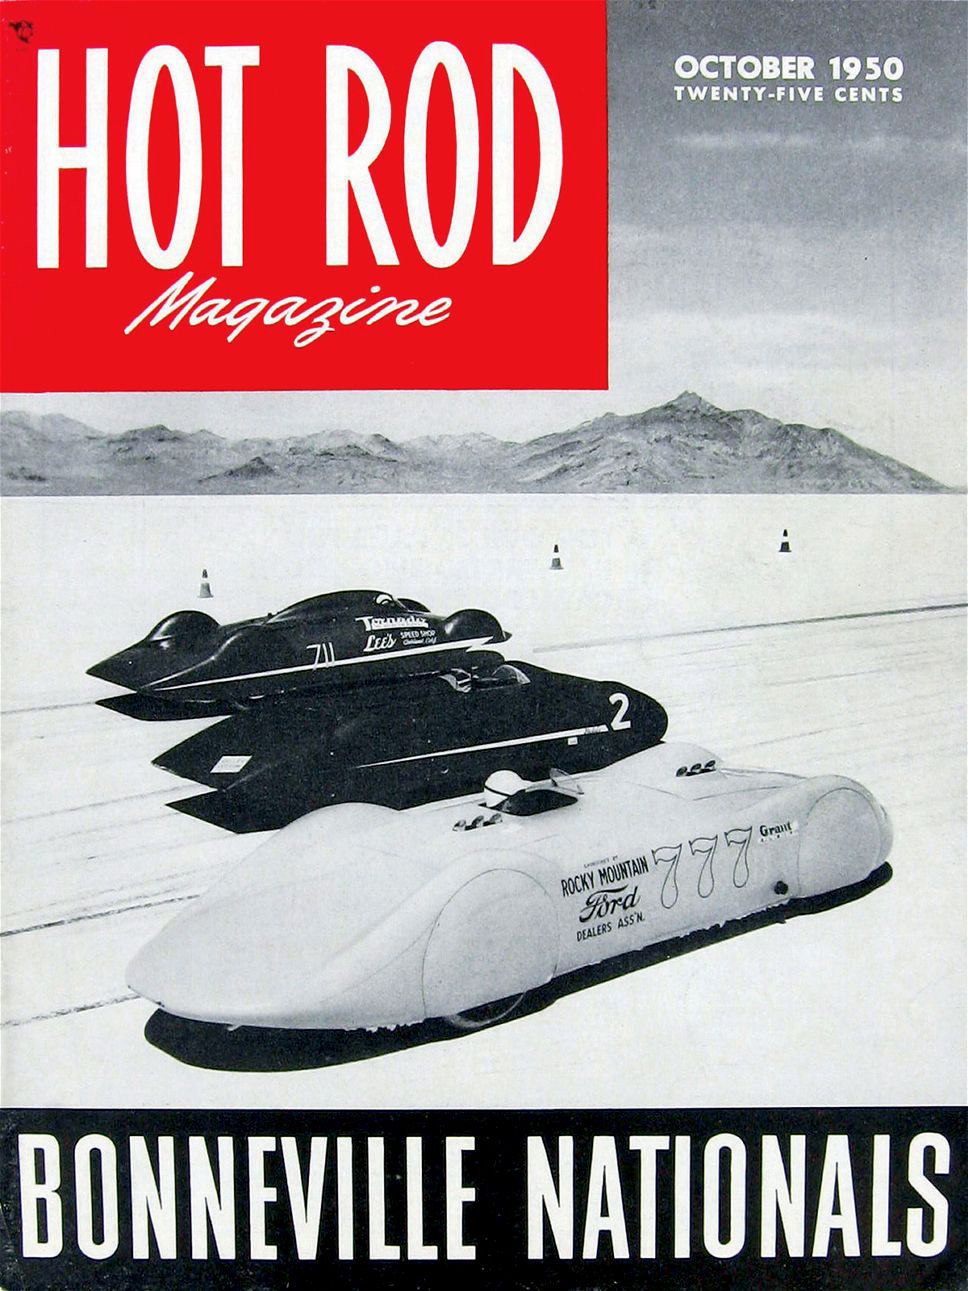 Hot Rod magazine cover in October 1950